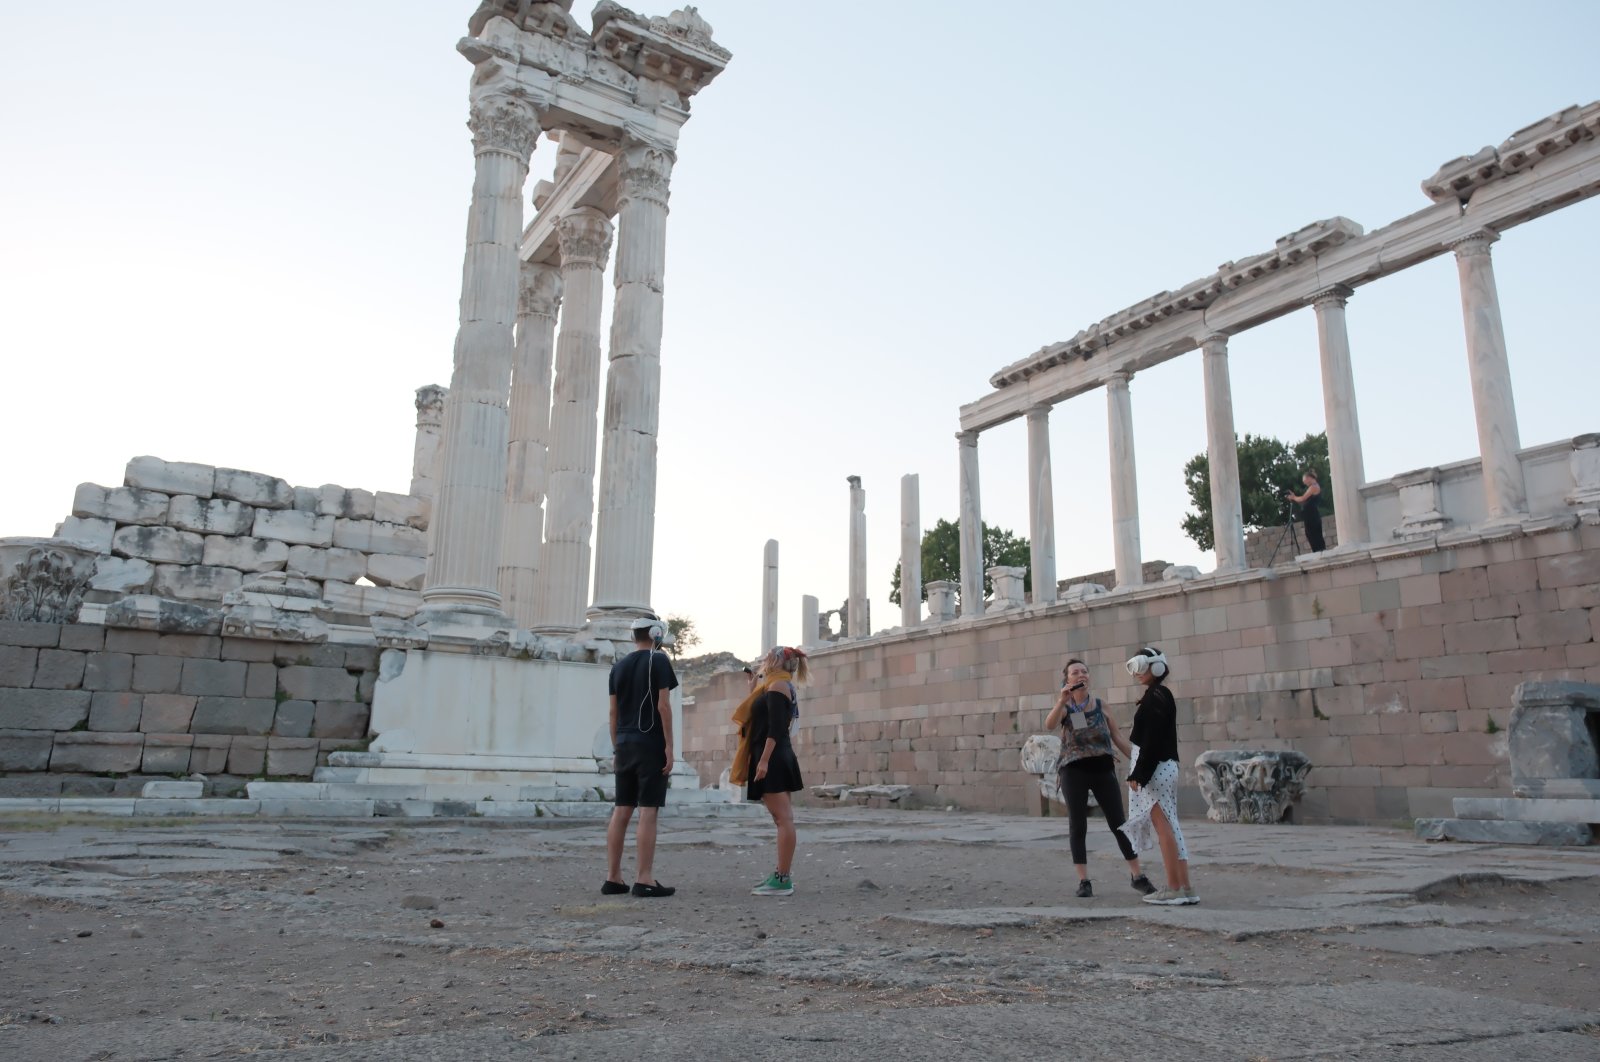 With the aim of becoming a sustainable and transformative festival, the Bergama Theater Festival invites participants to embark on new stories from the ancient structures to the streets of Bergama, tracing the paths of history, Izmir, Türkiye. (Photo courtesy of Bergama Theater Festival)